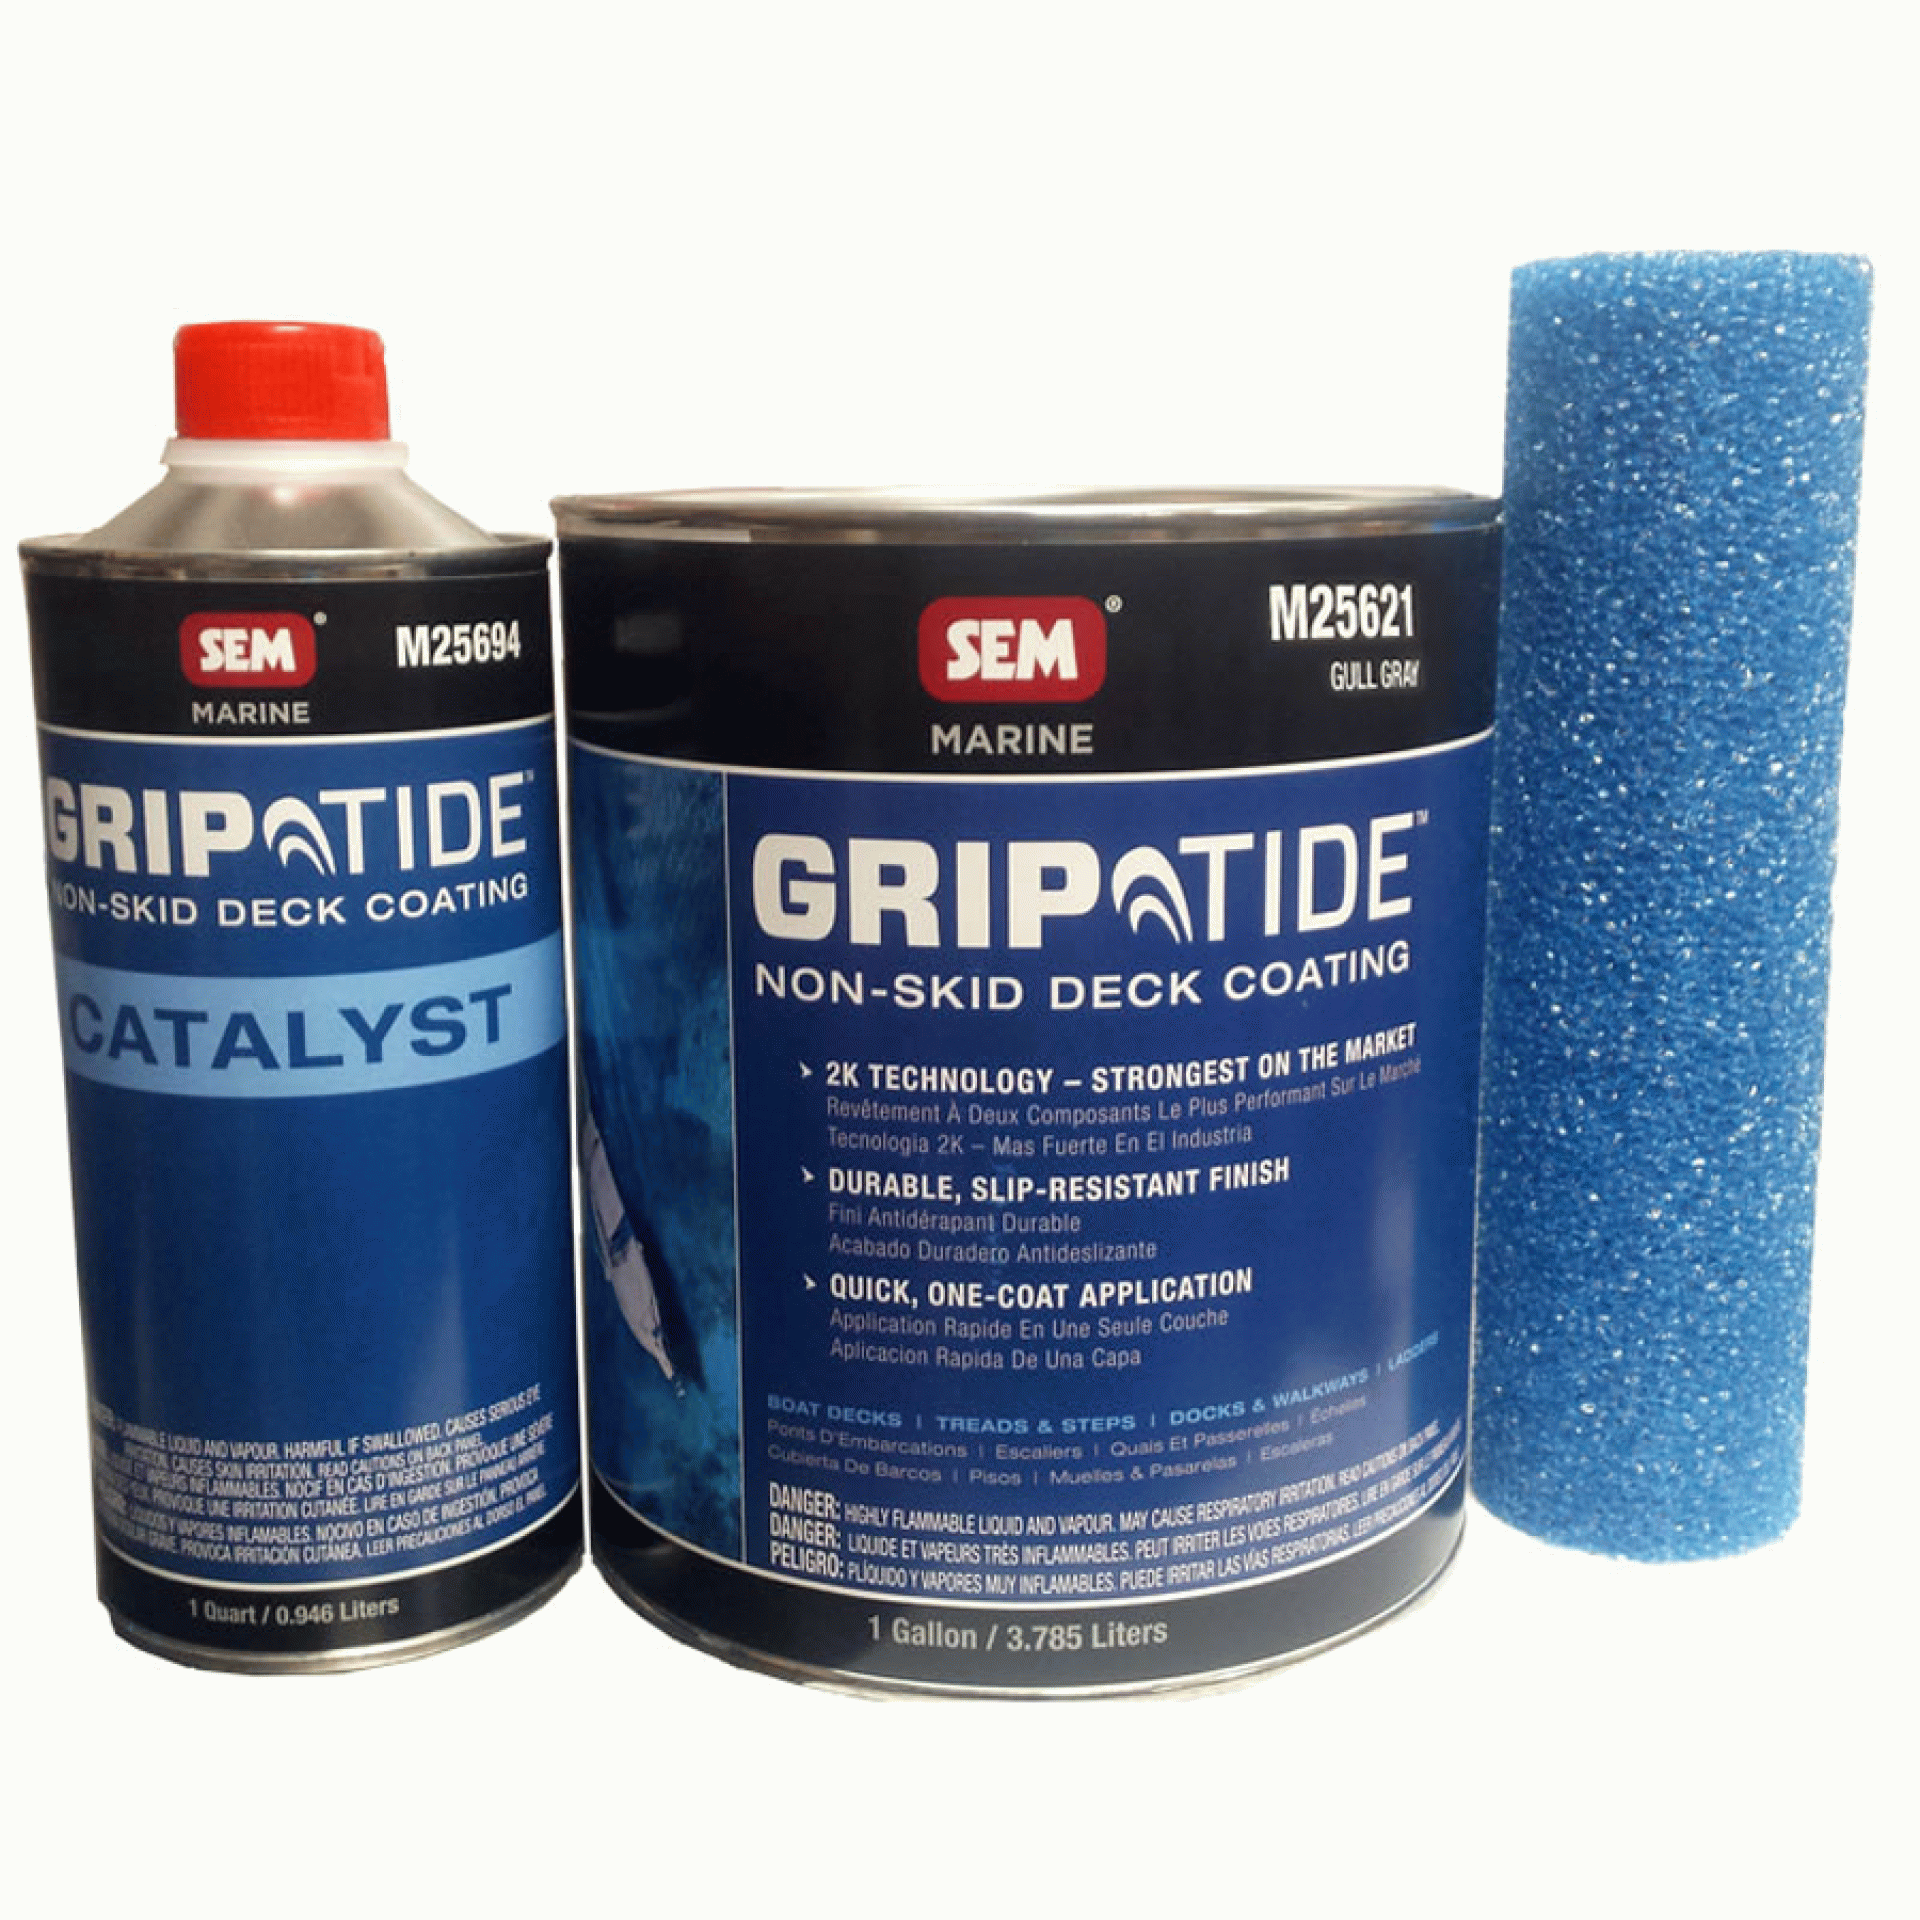 SEM PRODUCTS INC. | M25620 | GripTide Non-Skid Deck Coating - Gull Gray